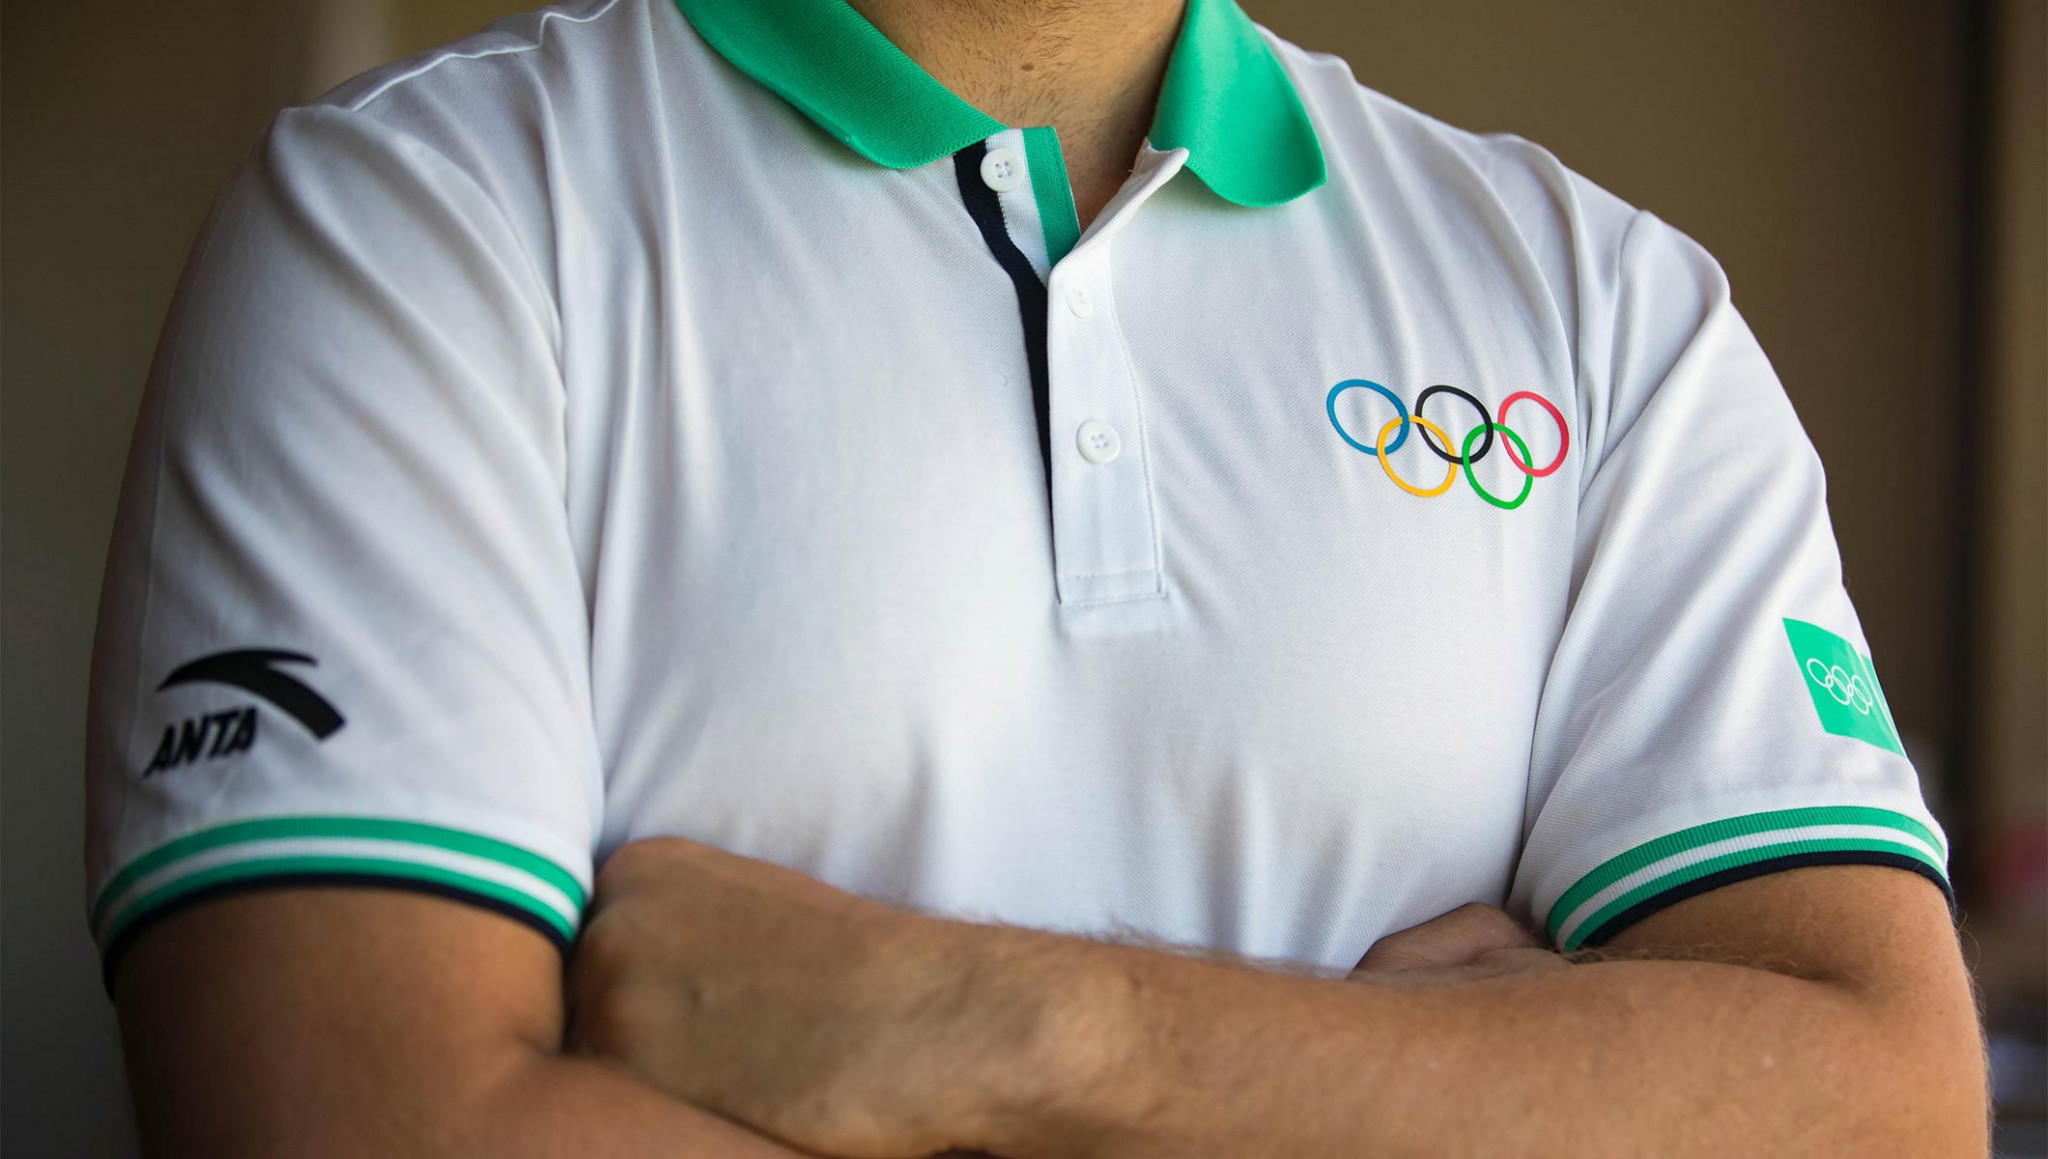 The IOC have renewed a deal with Anta Sports to provide uniforms and shoes for its members and staff ©IOC